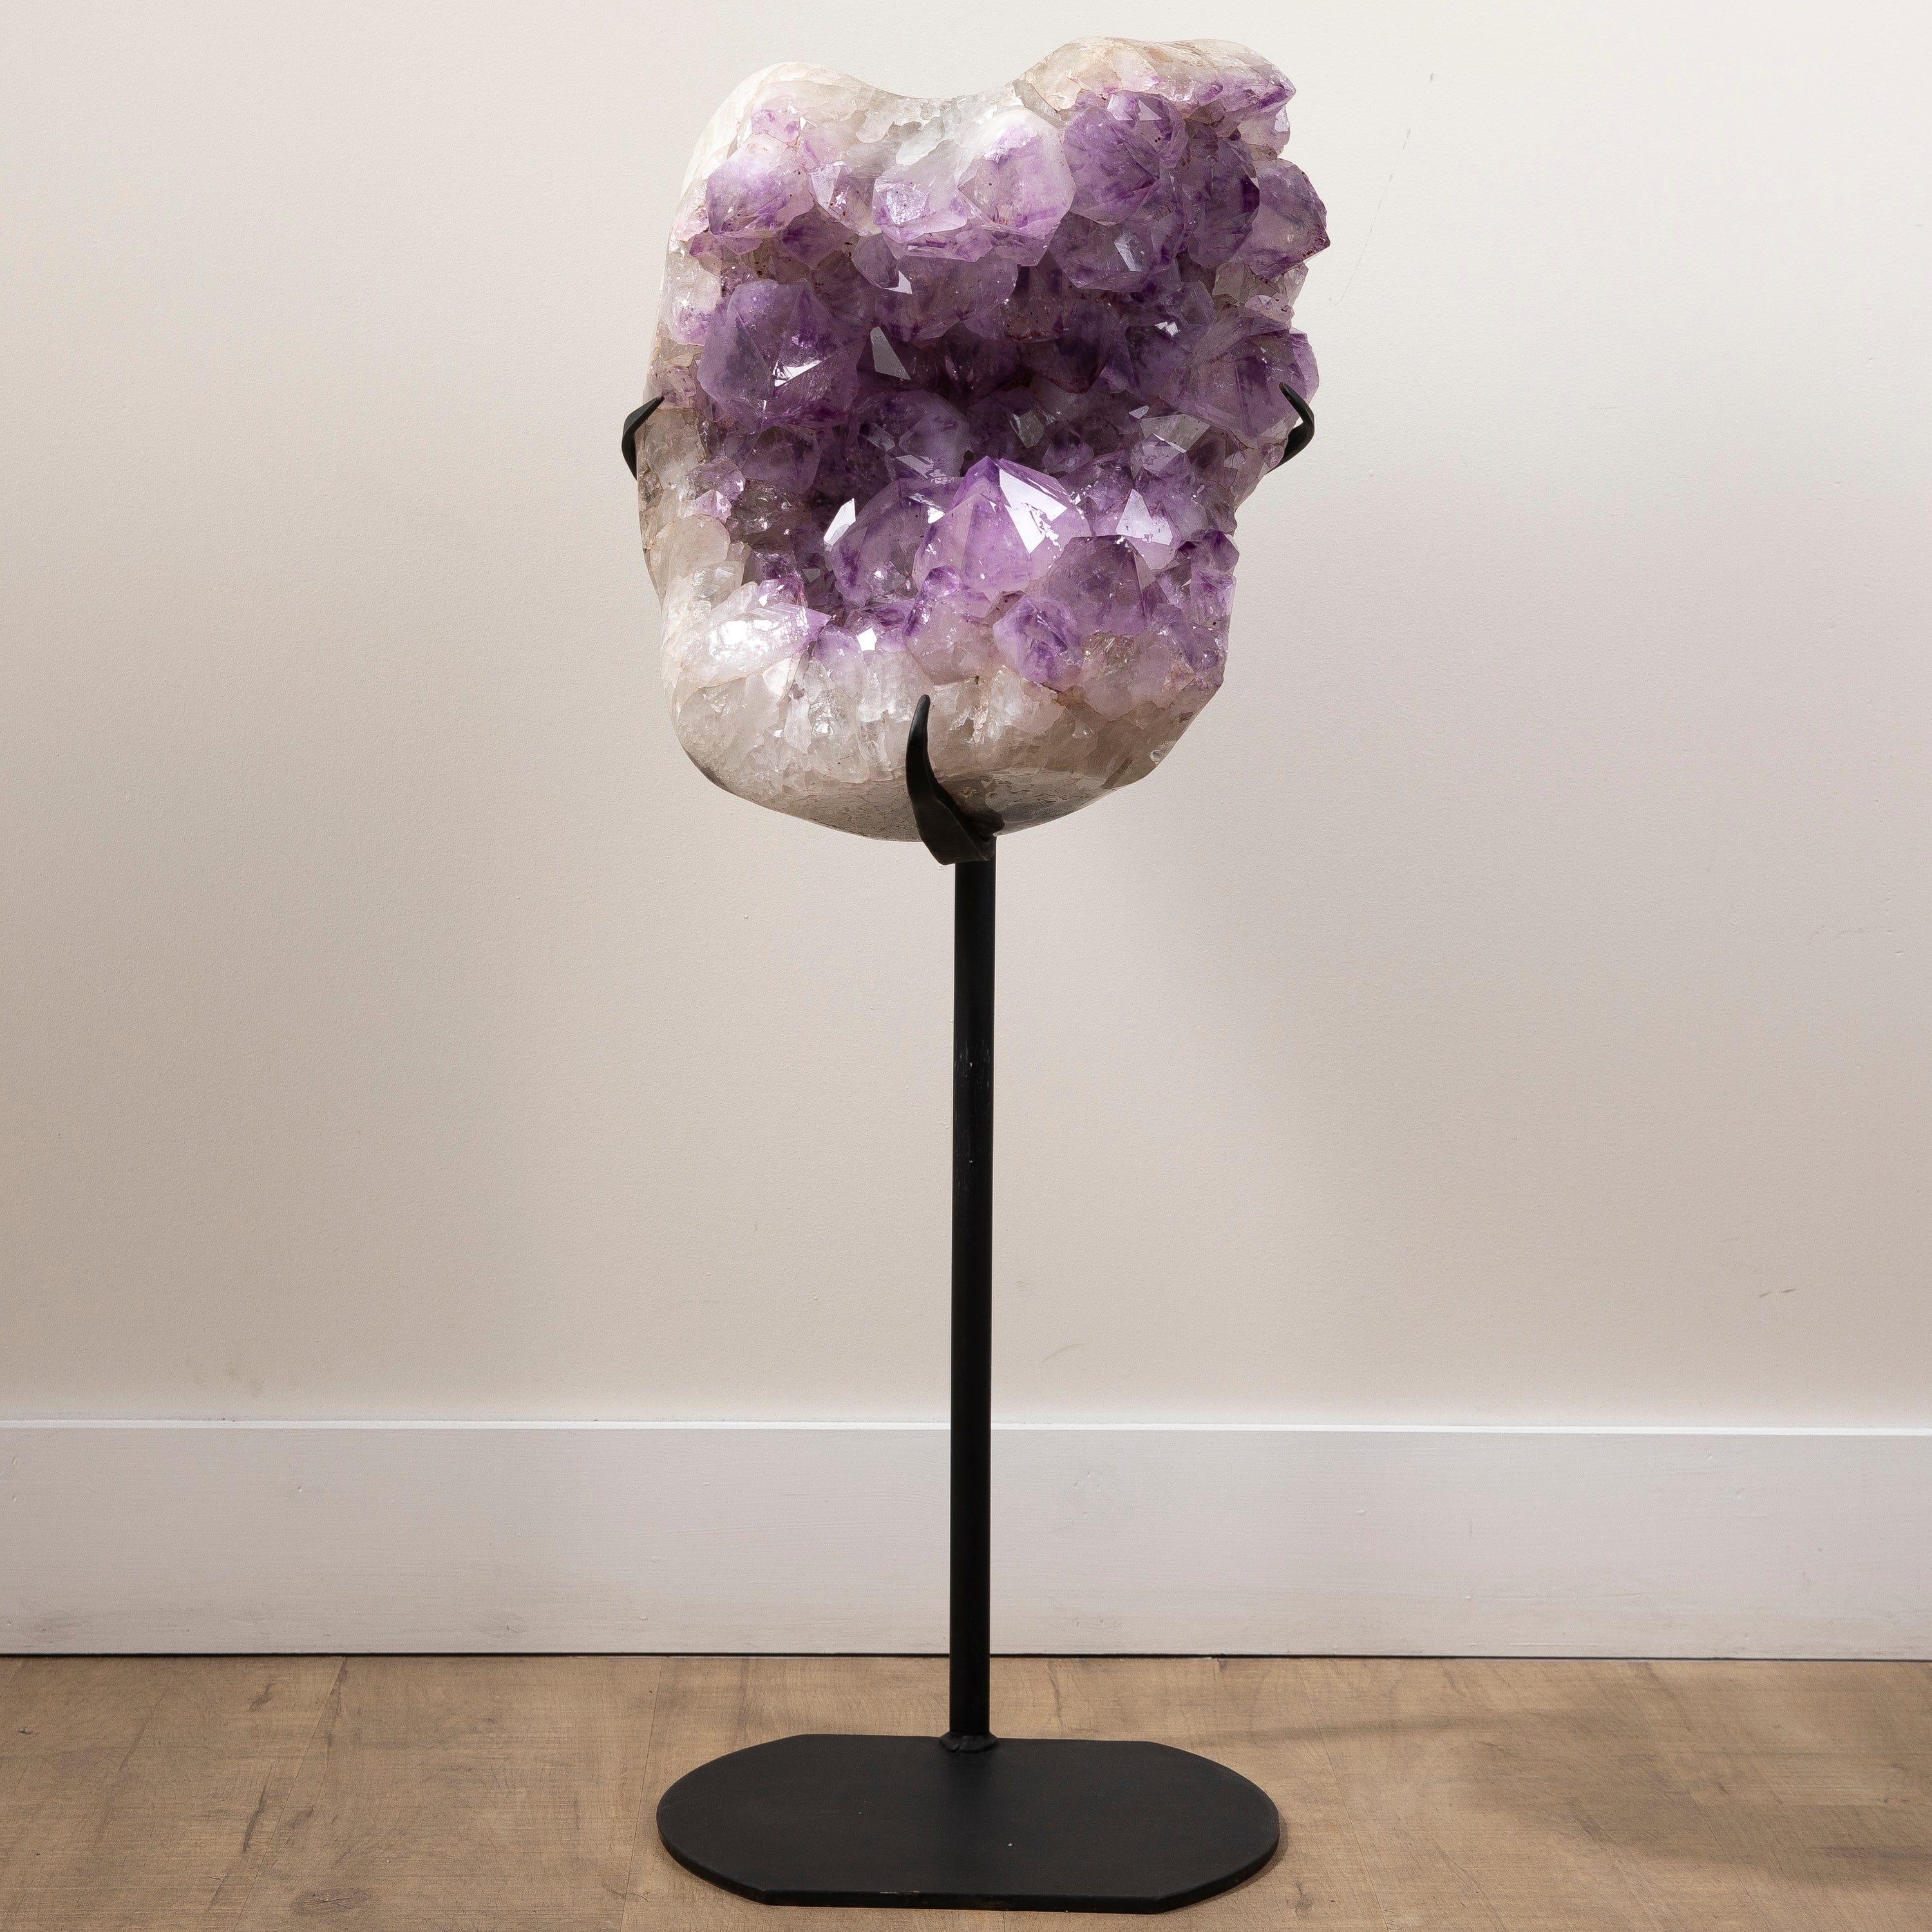 Kalifano Amethyst Amethyst Geode from Brazil on Custom Stand- 37" / 108 lbs BAG8800.002